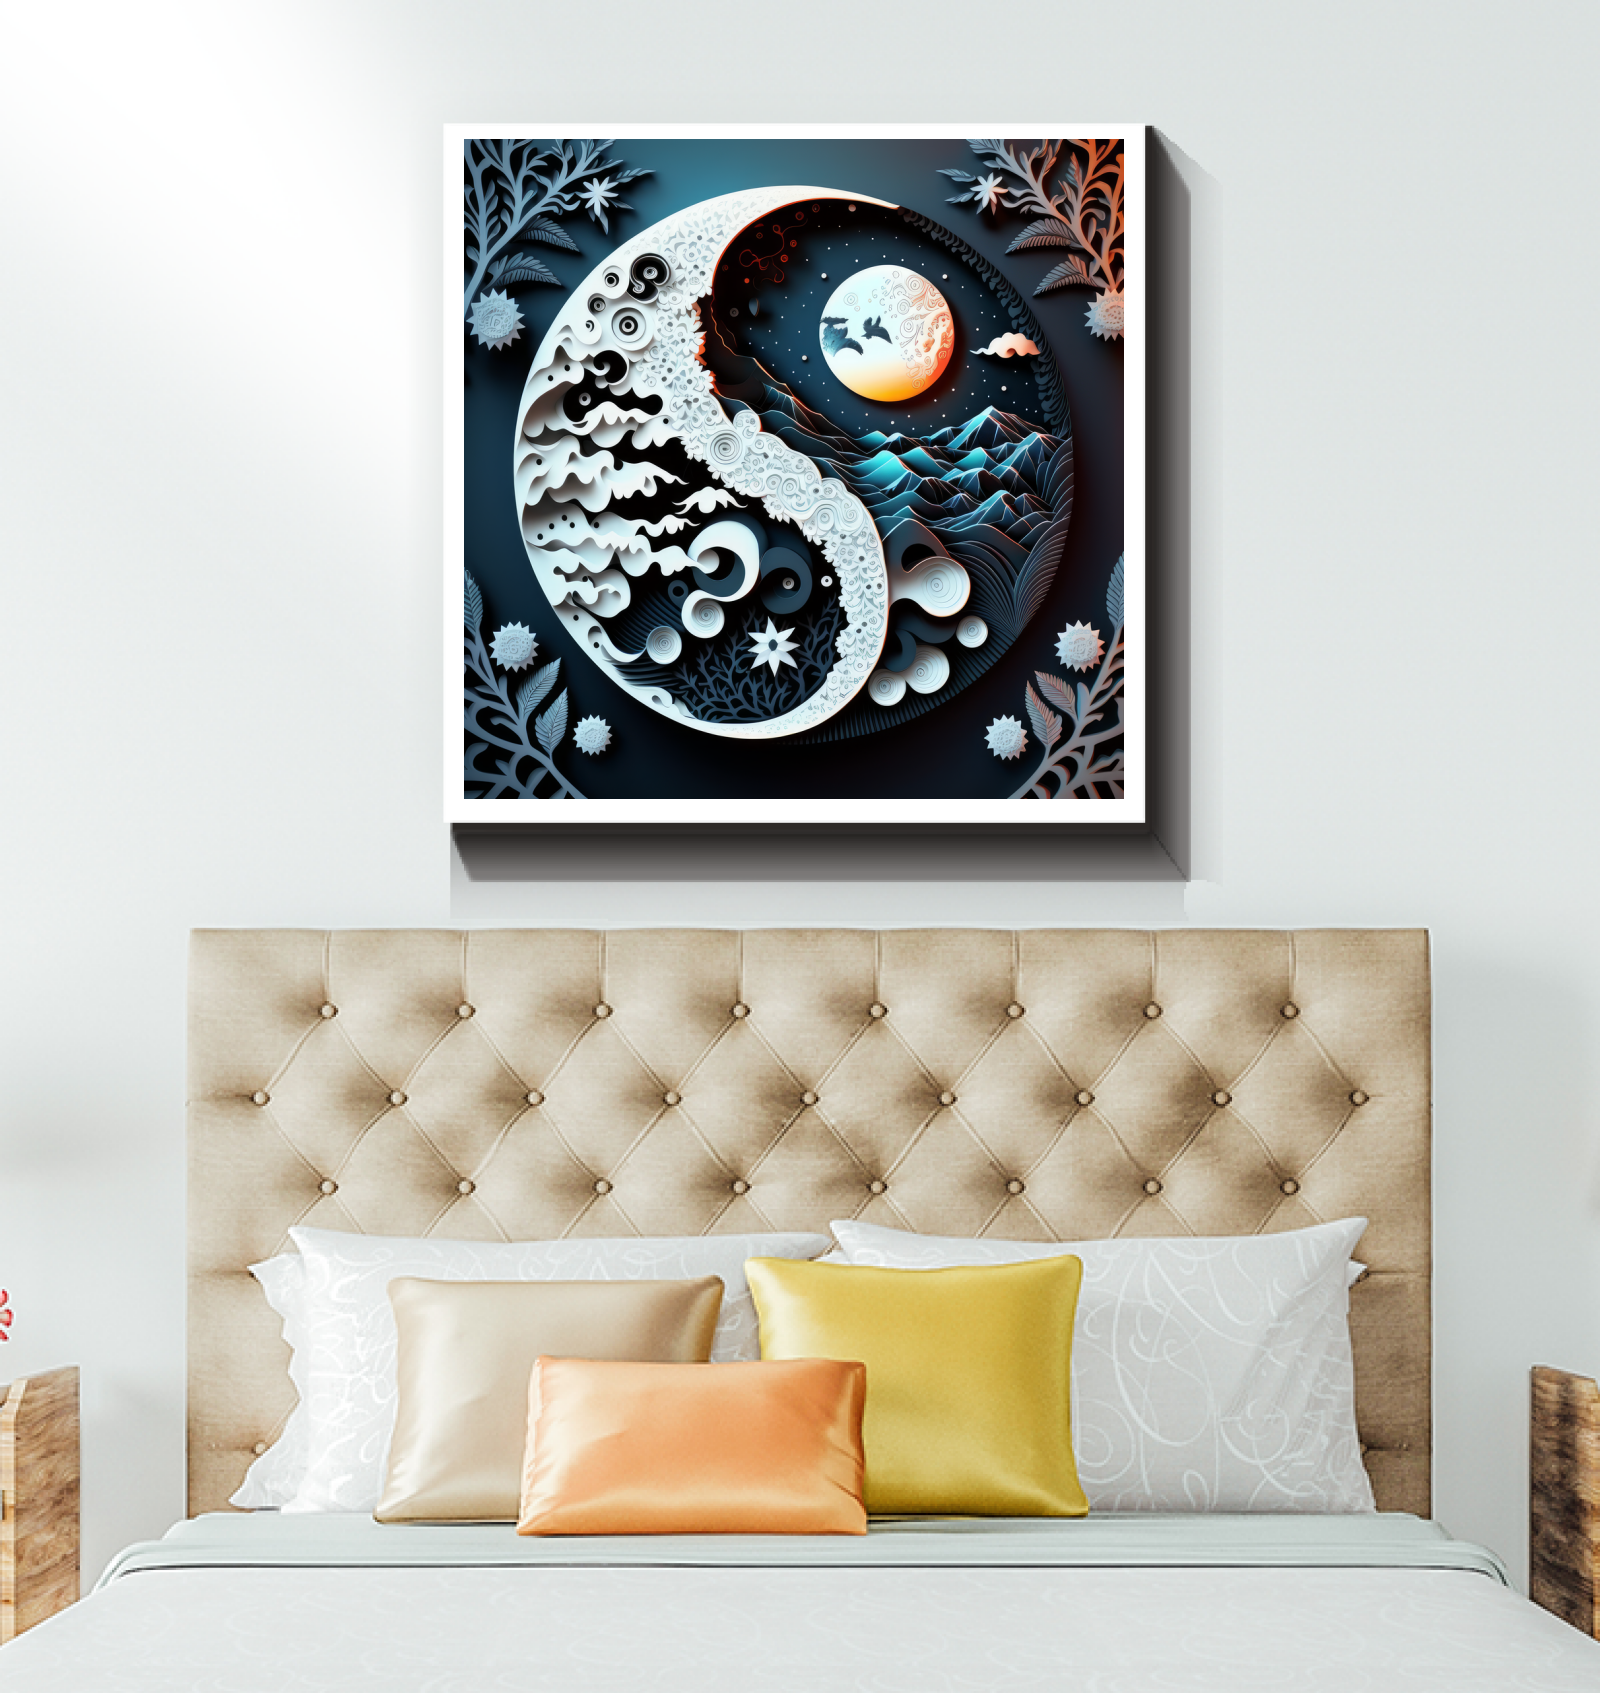 Art print of Earth merging with Sky on canvas.